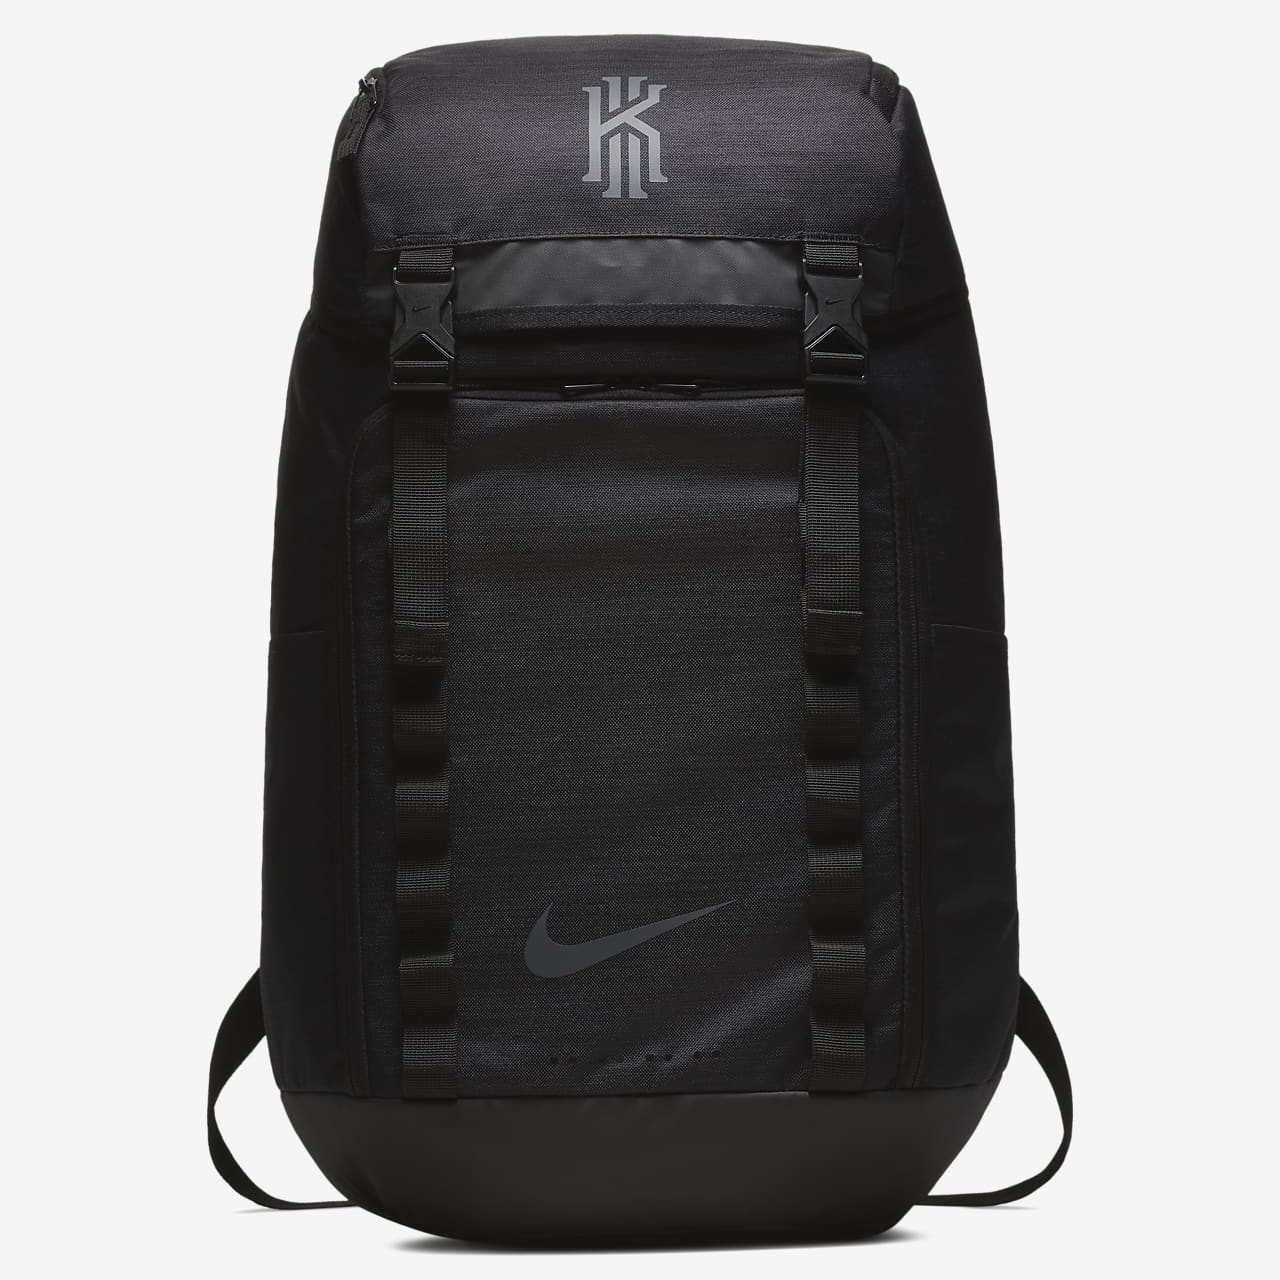 kyrie backpack review